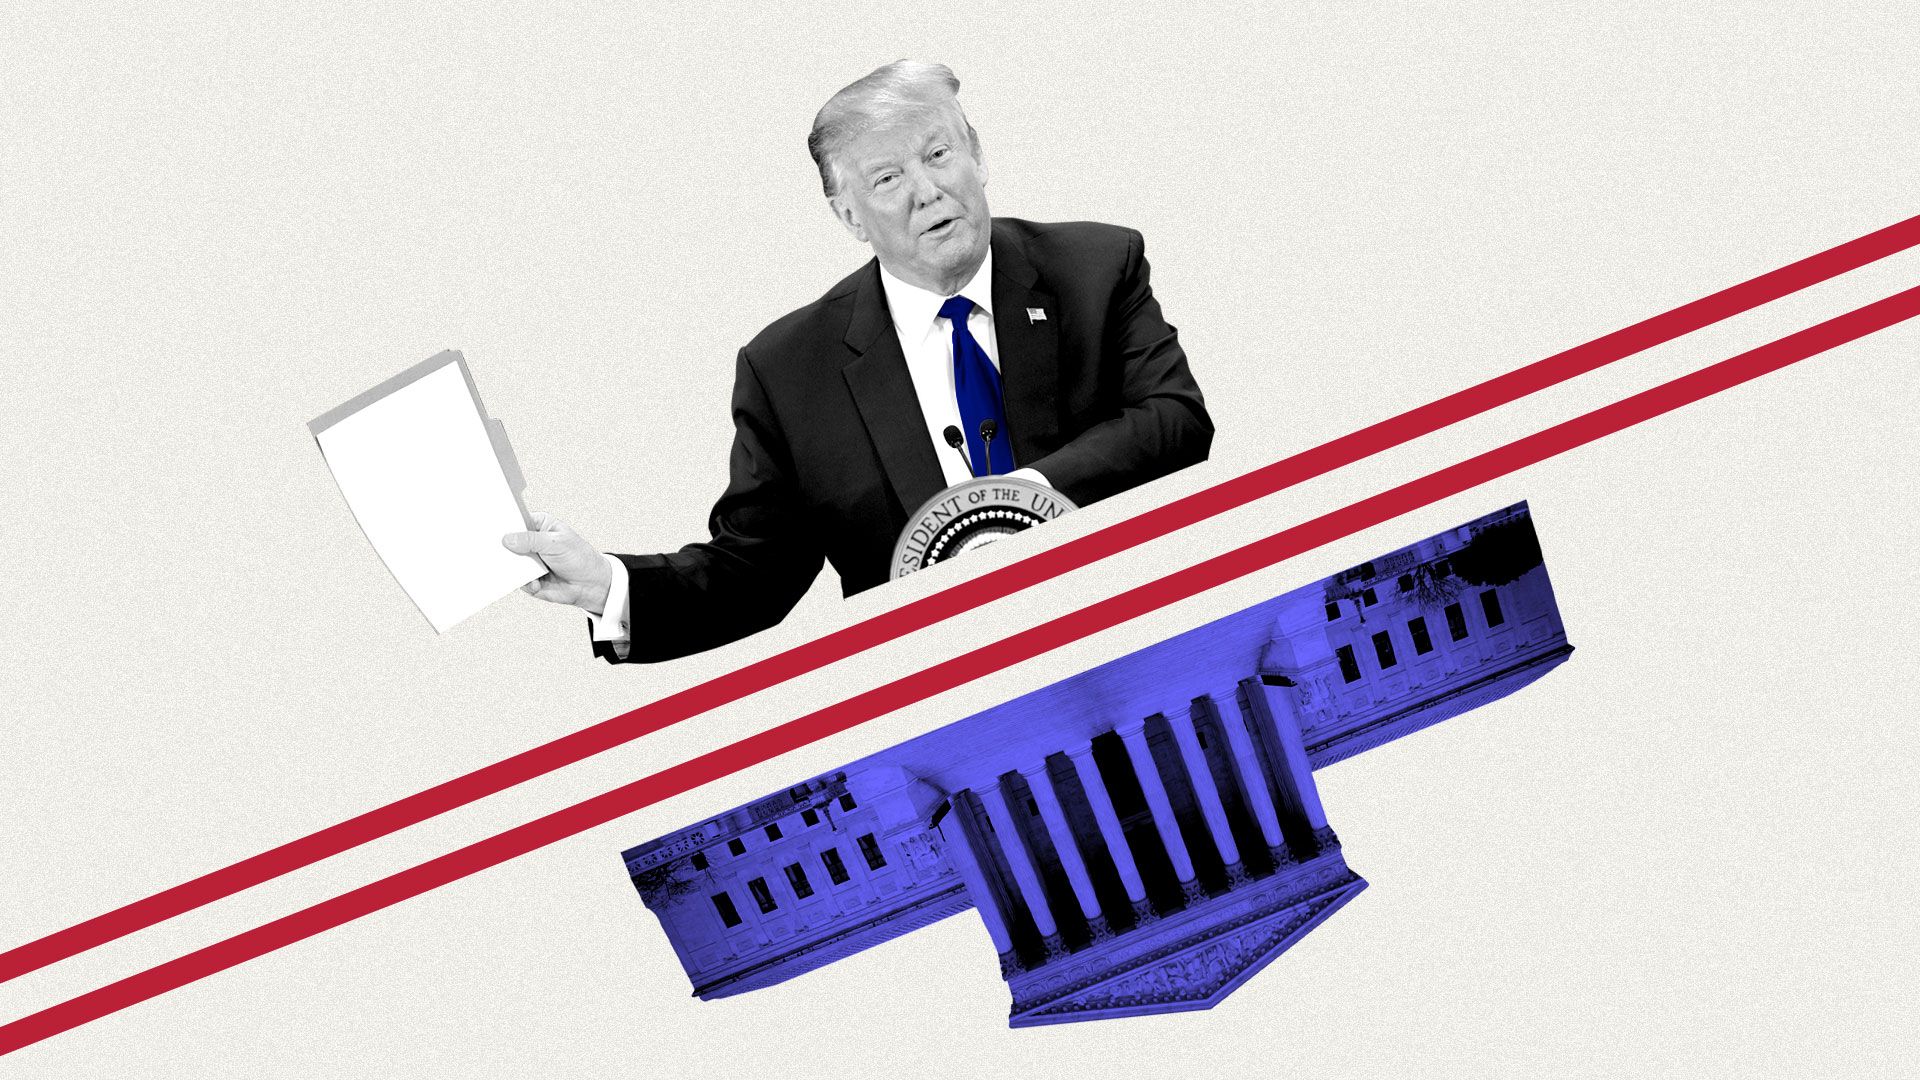 Photo illustration of Donald Trump holding up file and Supreme Court.